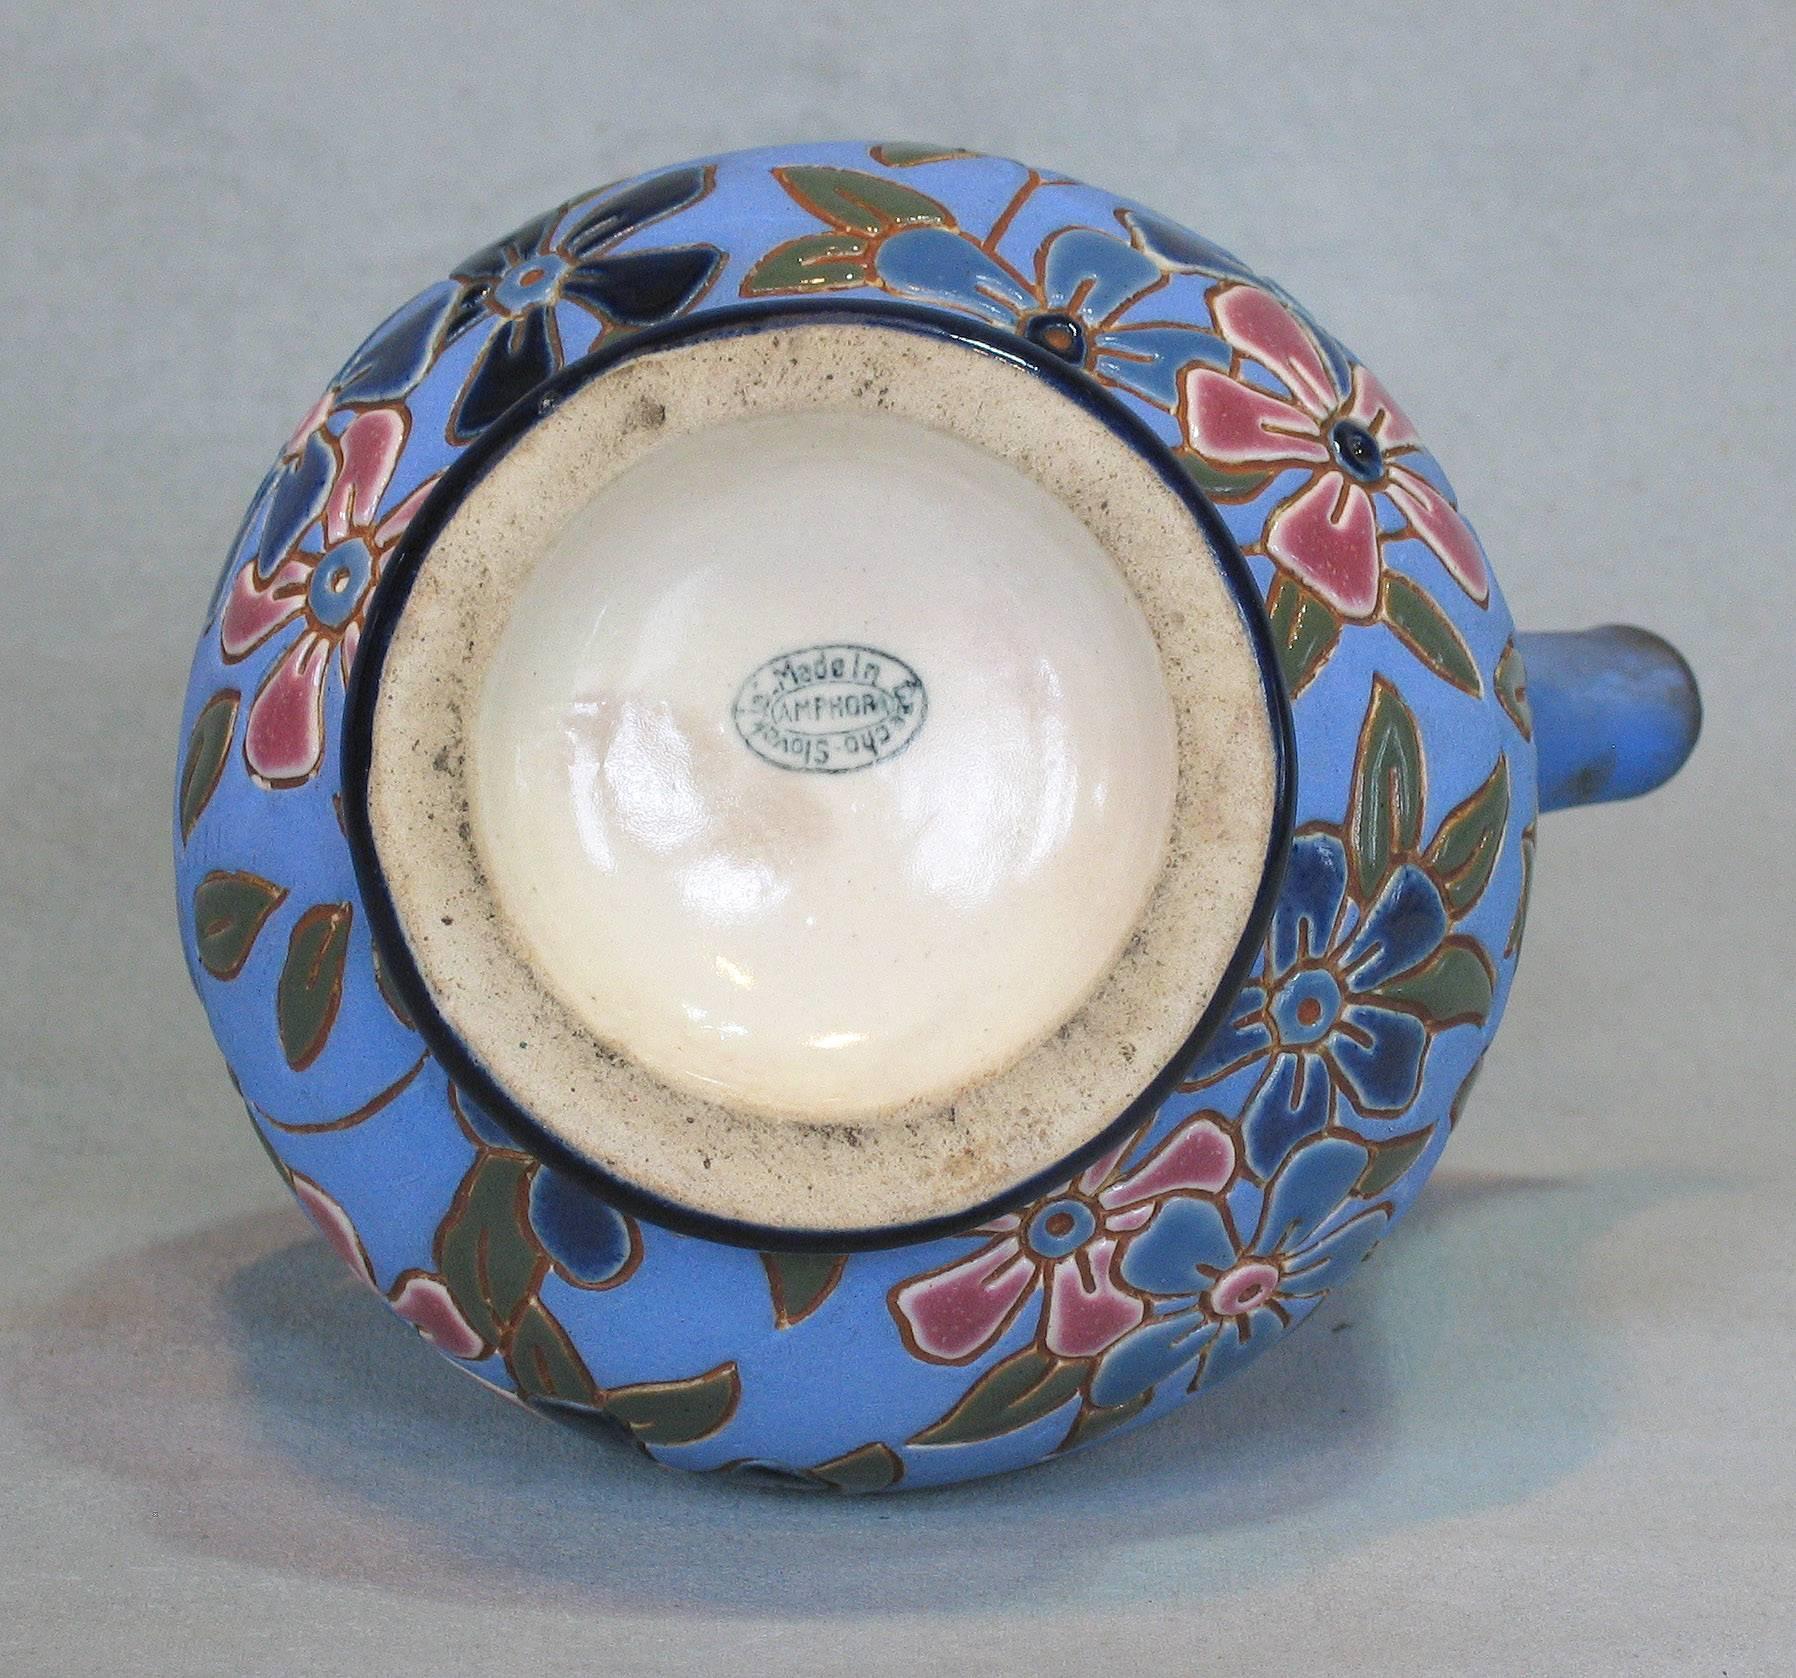 A Czechoslovakian glazed earthenware pitcher by Amphora, circa 1918-1939, incised enameled pottery blue background and floral stylized decorated. Opposite curve handle and spout, the pitcher is 8